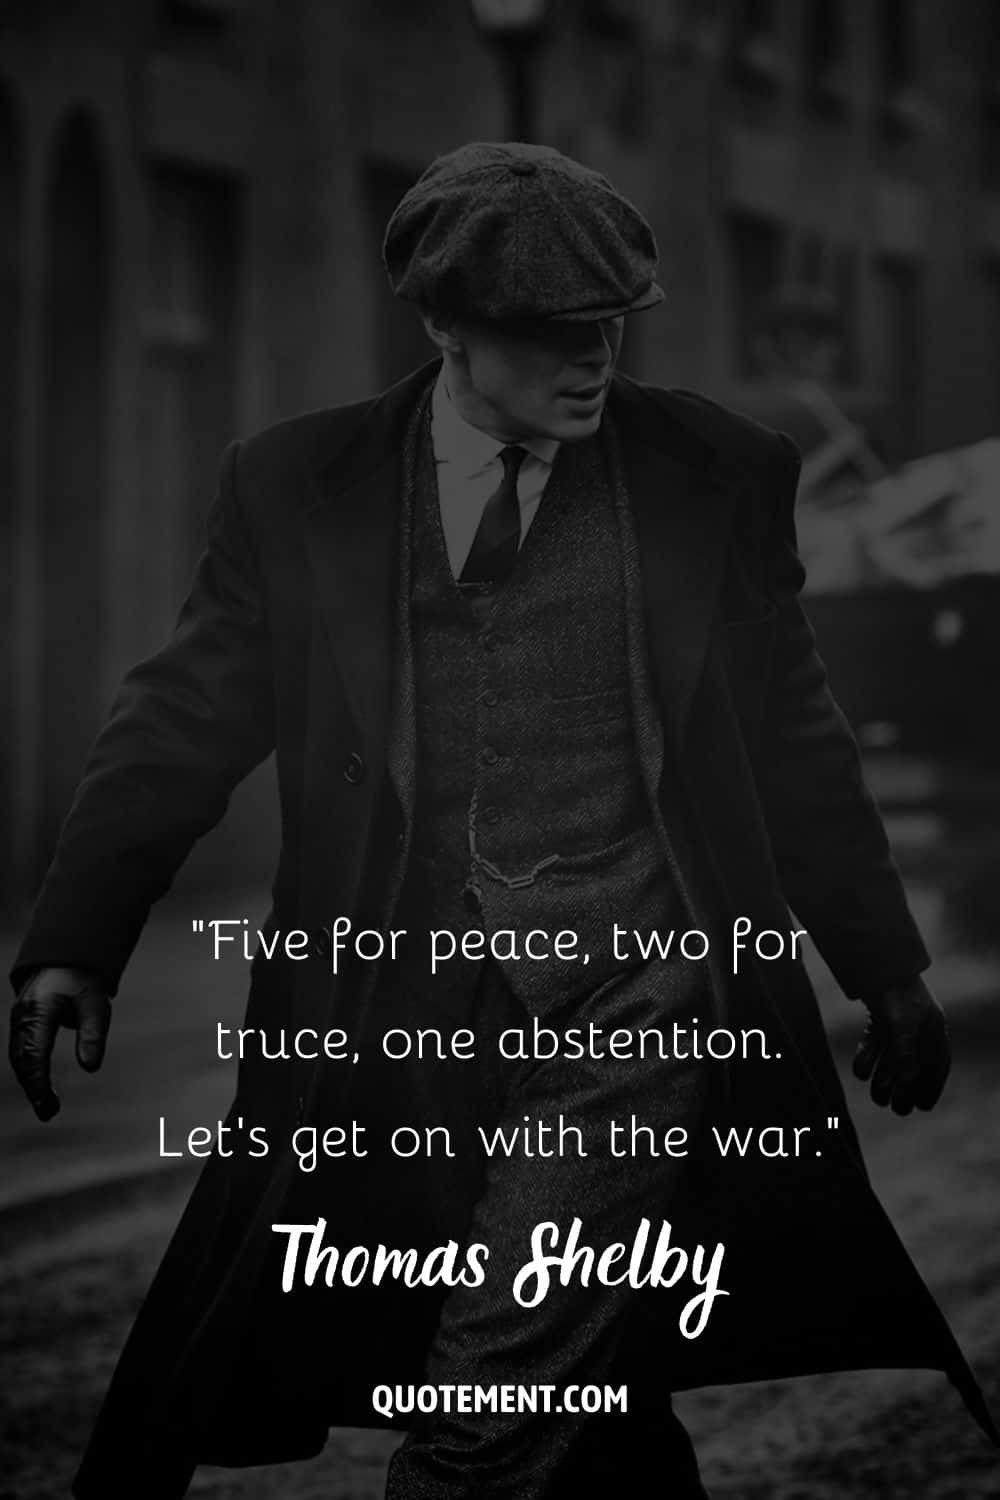 Cillian Murphy struts in Peaky Blinder attire representing wise thomas shelby quote
